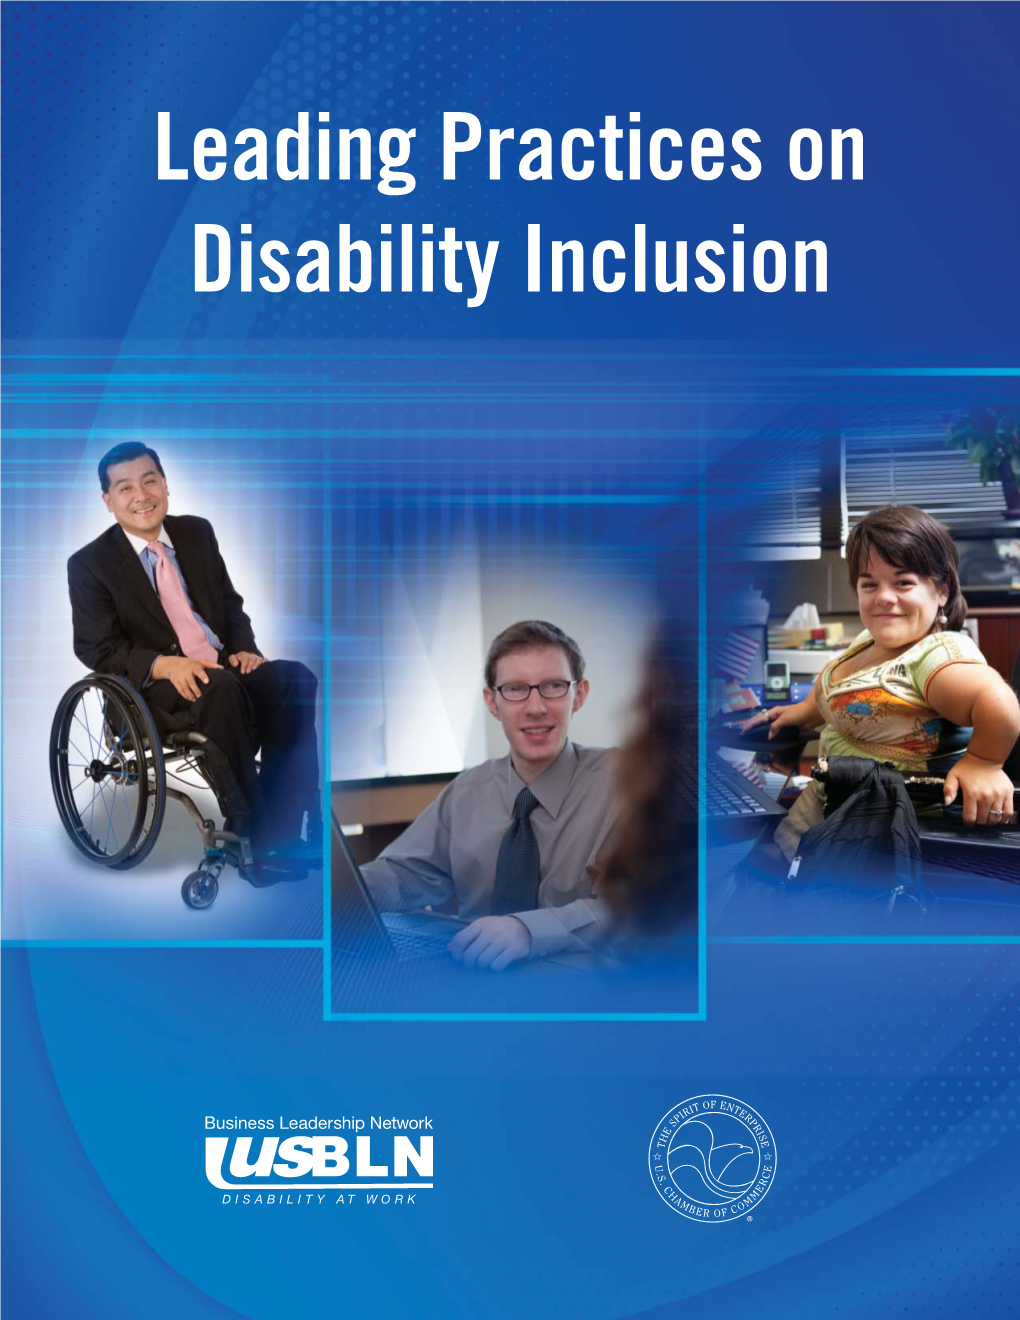 Leading Practices on Disability Inclusion the U.S